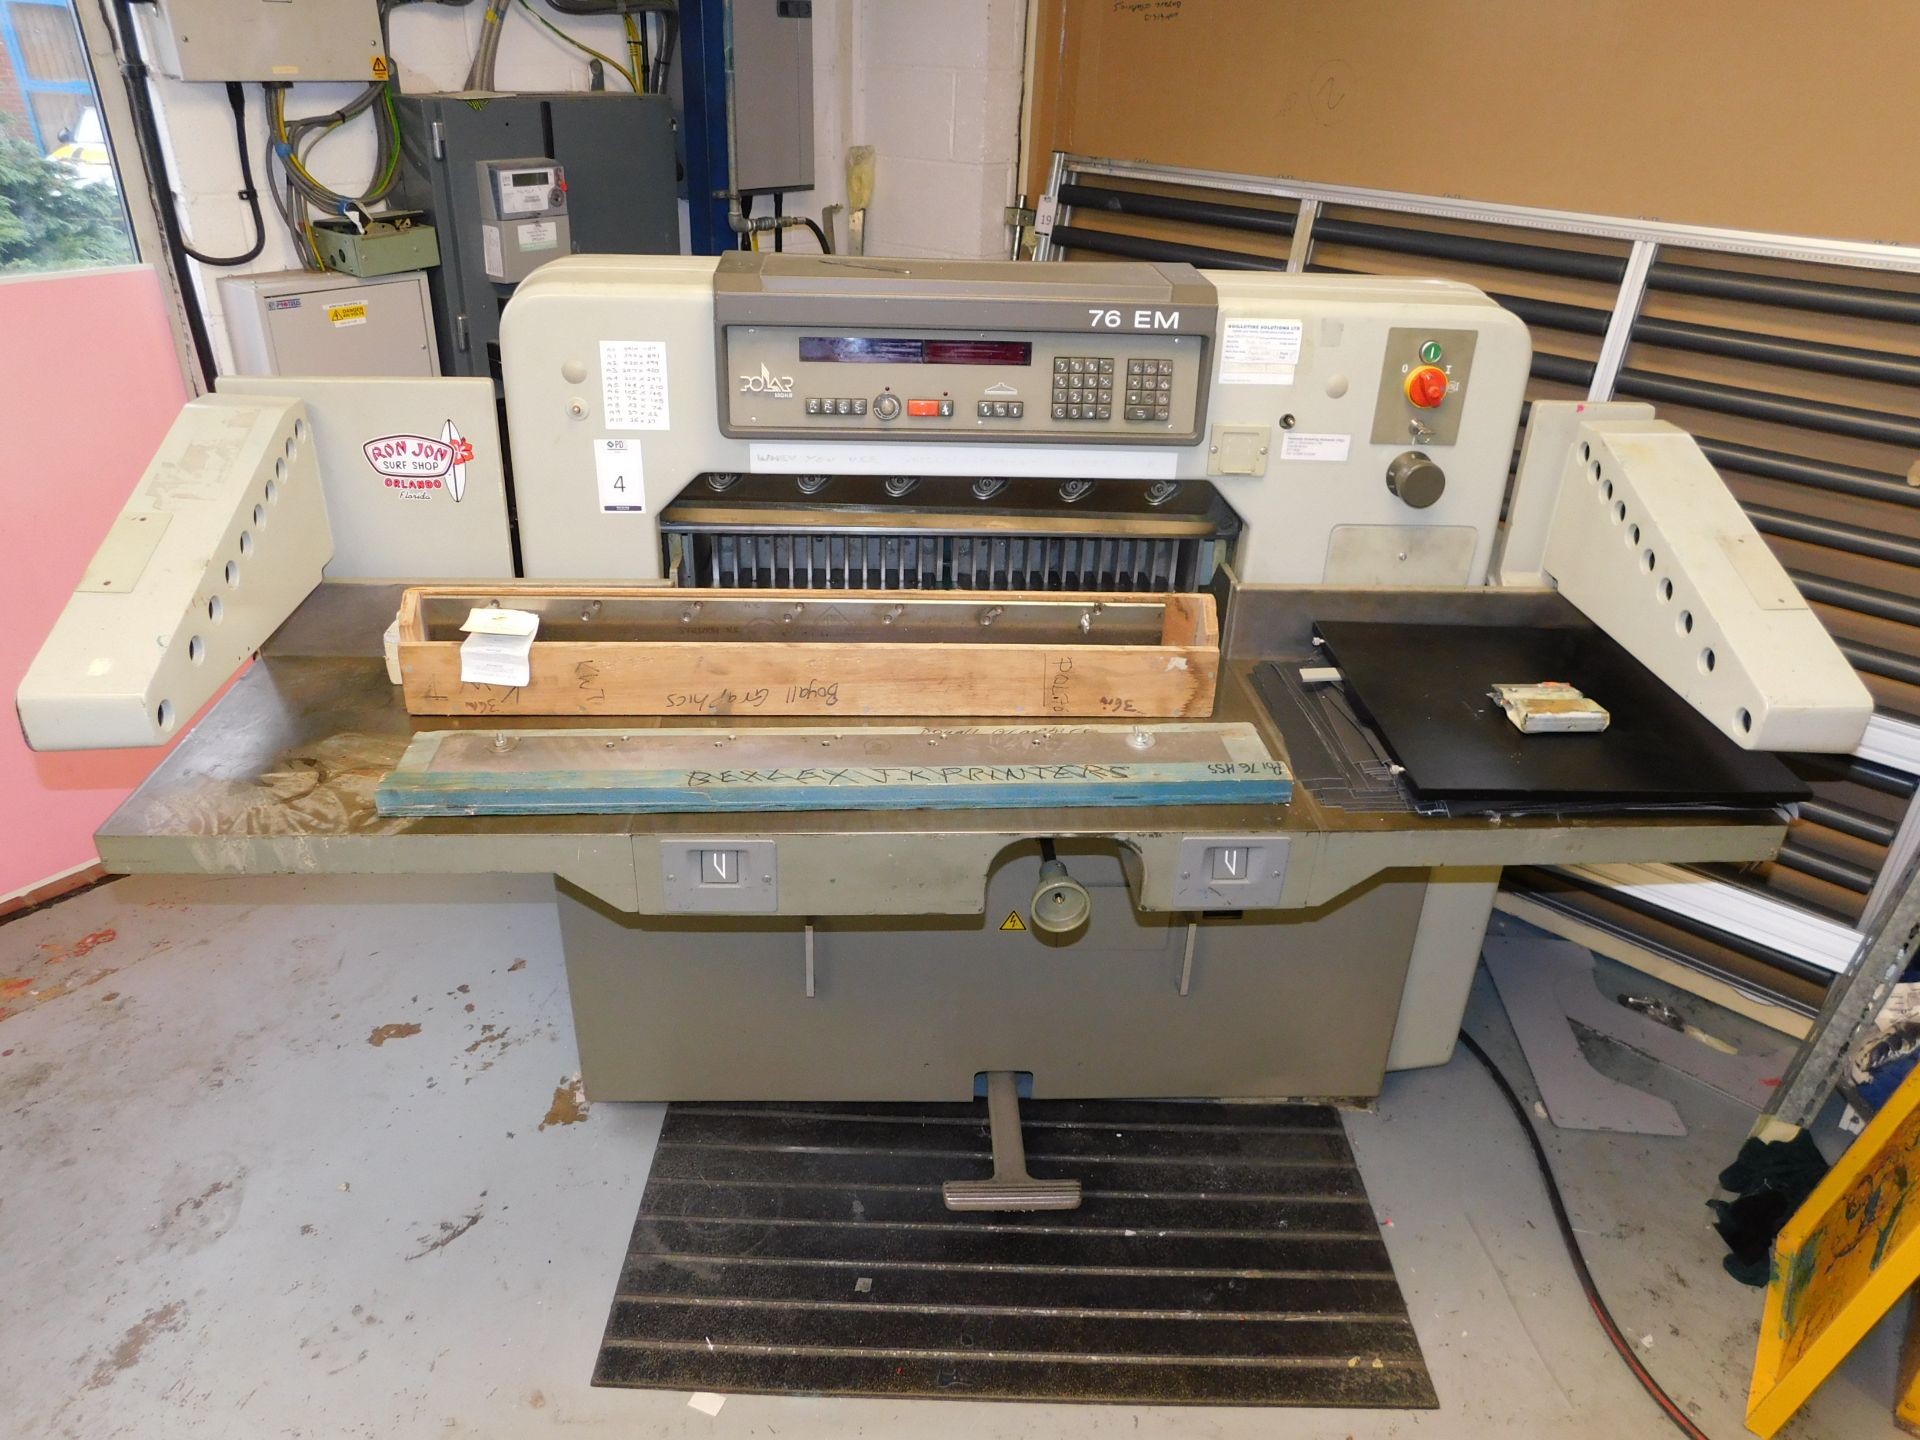 Polar 76EM Paper Guillotine, Serial Number 6461310 (1994) (To Be Collected Wednesday 27th November)